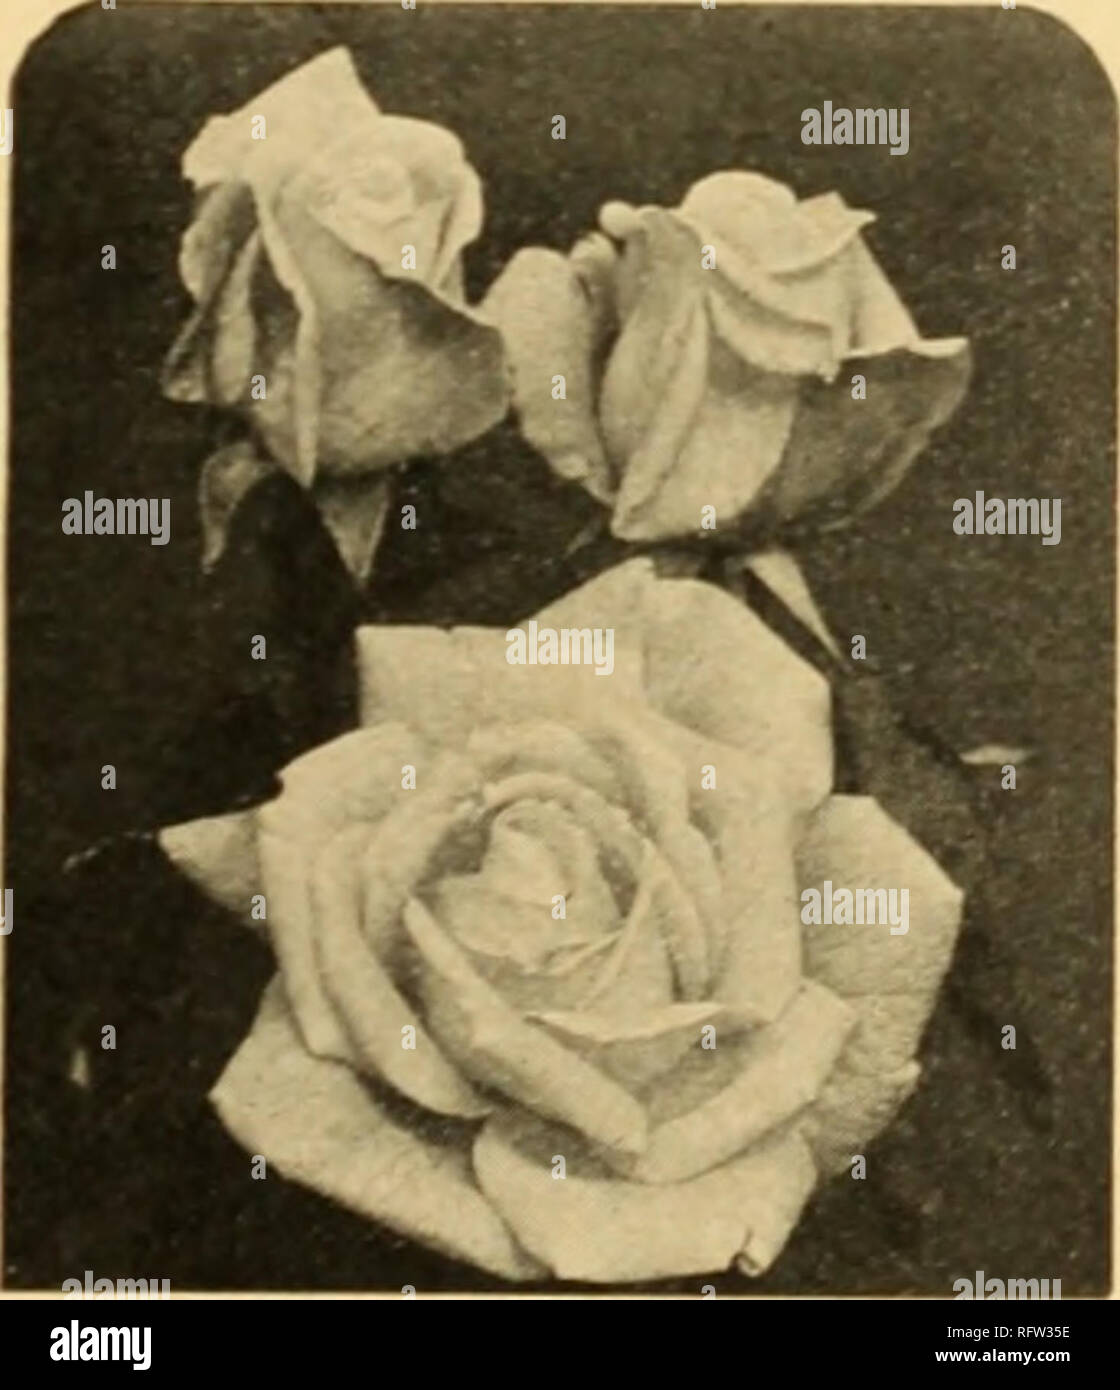 . Capitol city seeds for 1945. Nurseries (Horticulture) Catalogs; Bulbs (Plants) Catalogs; Vegetables Catalogs; Garden tools Catalogs; Seeds Catalogs. New Hybrid Tea or Monthly- Roses PATENTED VARIETIES California. Pat 44°. Bronz apricot; re- verse of petals coppery pink. Small foli- age. ?1 .^) each. Charlotte Armstrong. Pat. 4SS. Cerise to spectrum-red. Slender buds open into large blooms. SI .50 each. Crimson Glory. Pat. 105. Deep velvety crimson. ?1.25 each. Eclipse. P.it. 172. Rich gold; lovely long buds. 11.25 each. Fred Edmunds. Pat. pending. I ong buds of burnt orange opening to coppe Stock Photo